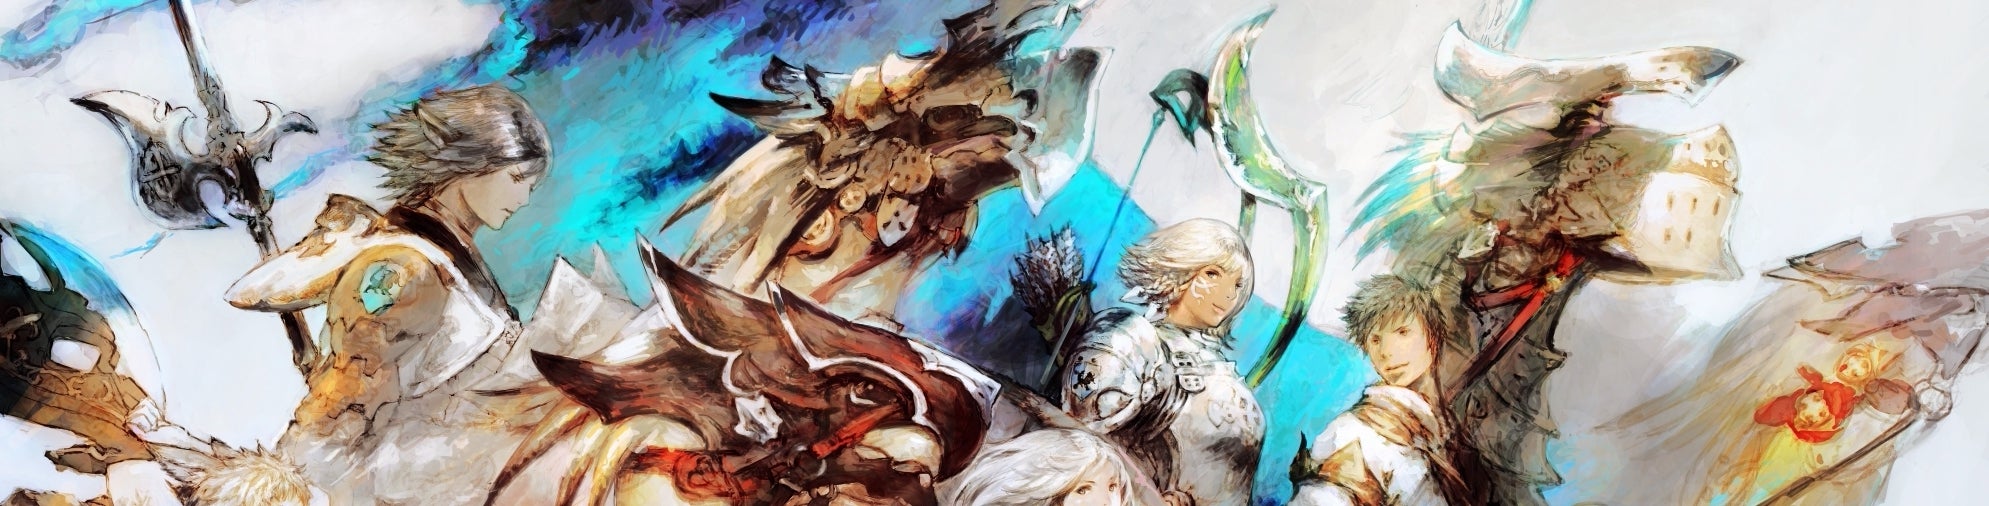 Image for How Final Fantasy's biggest failure changed the series for the better